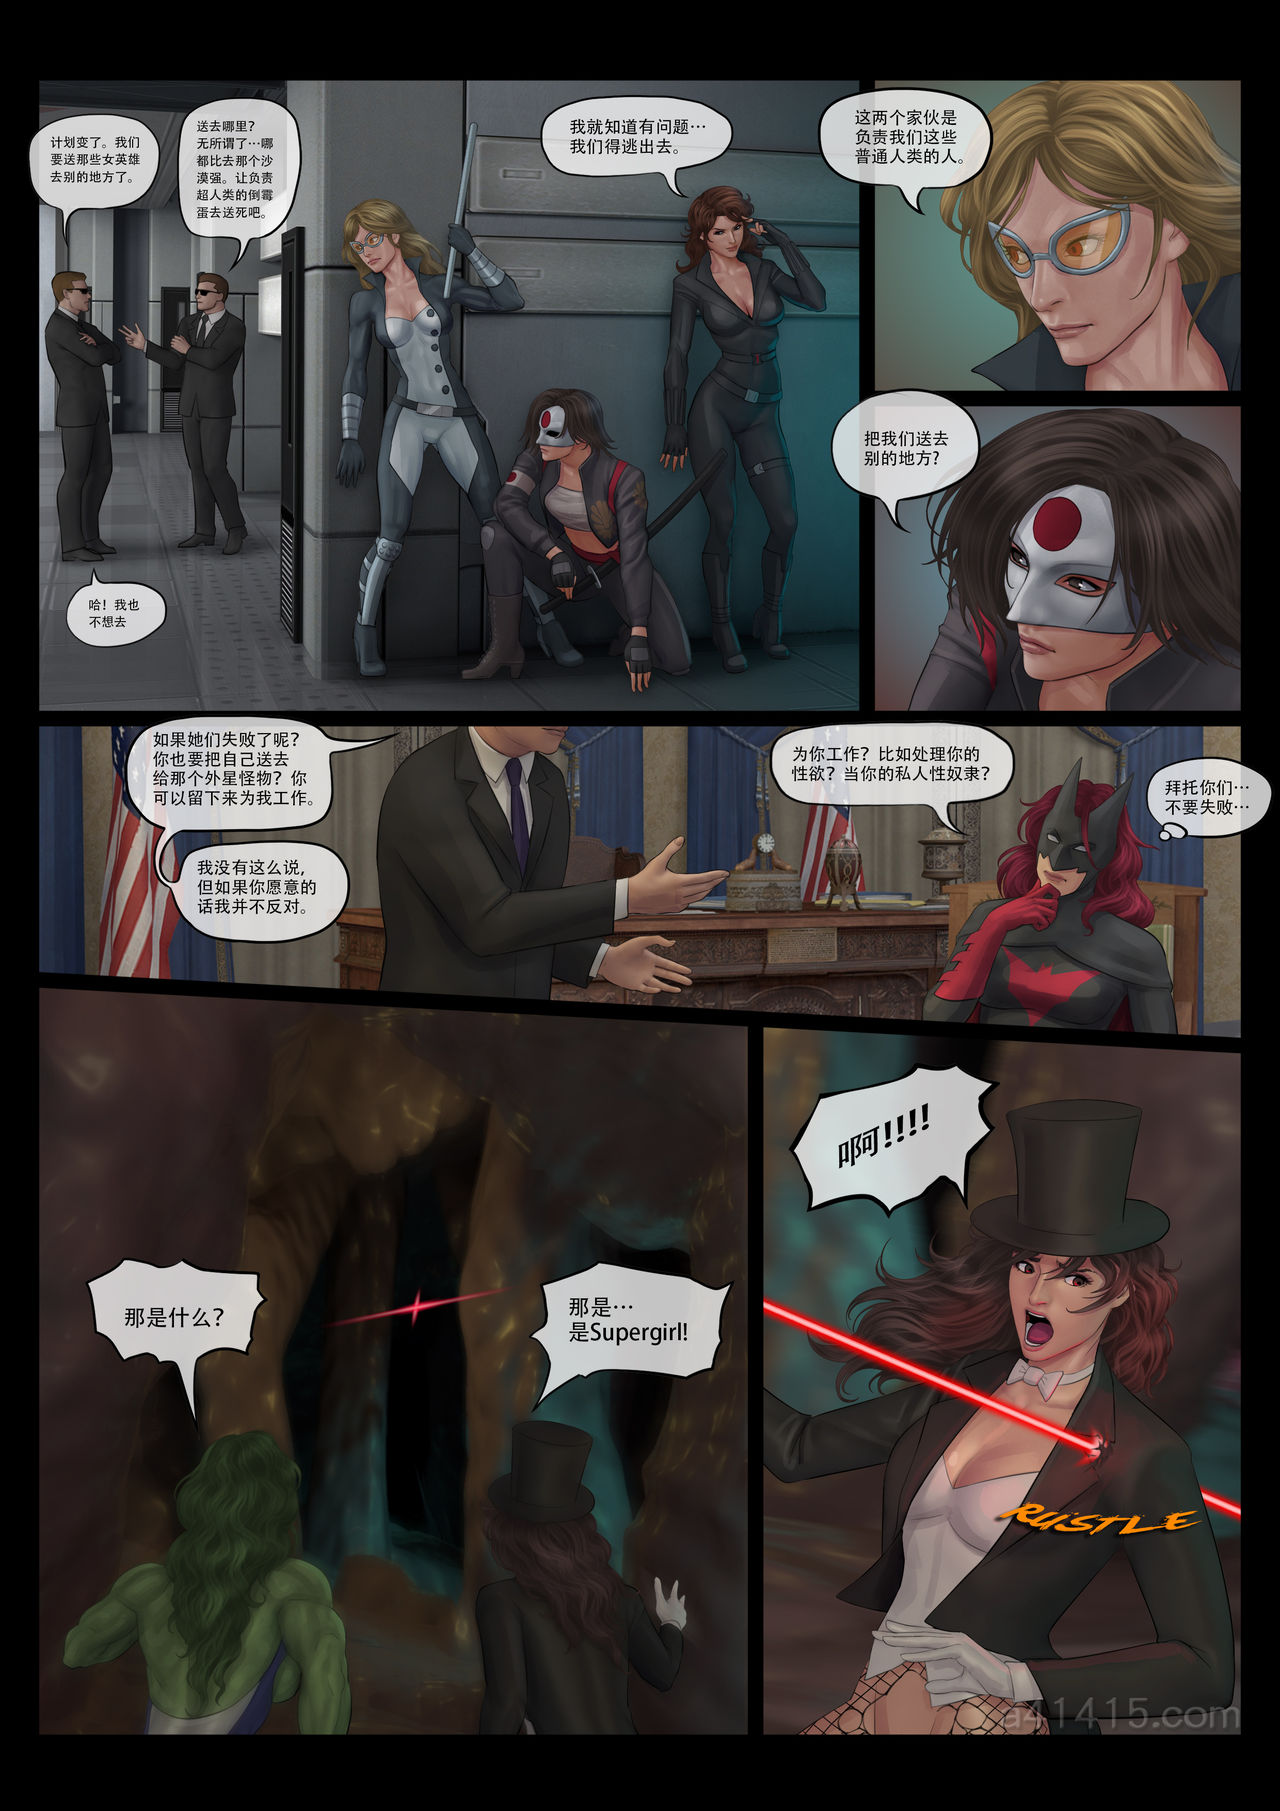 [Feather] - Avengers nightmare 01- 04 page 69 full